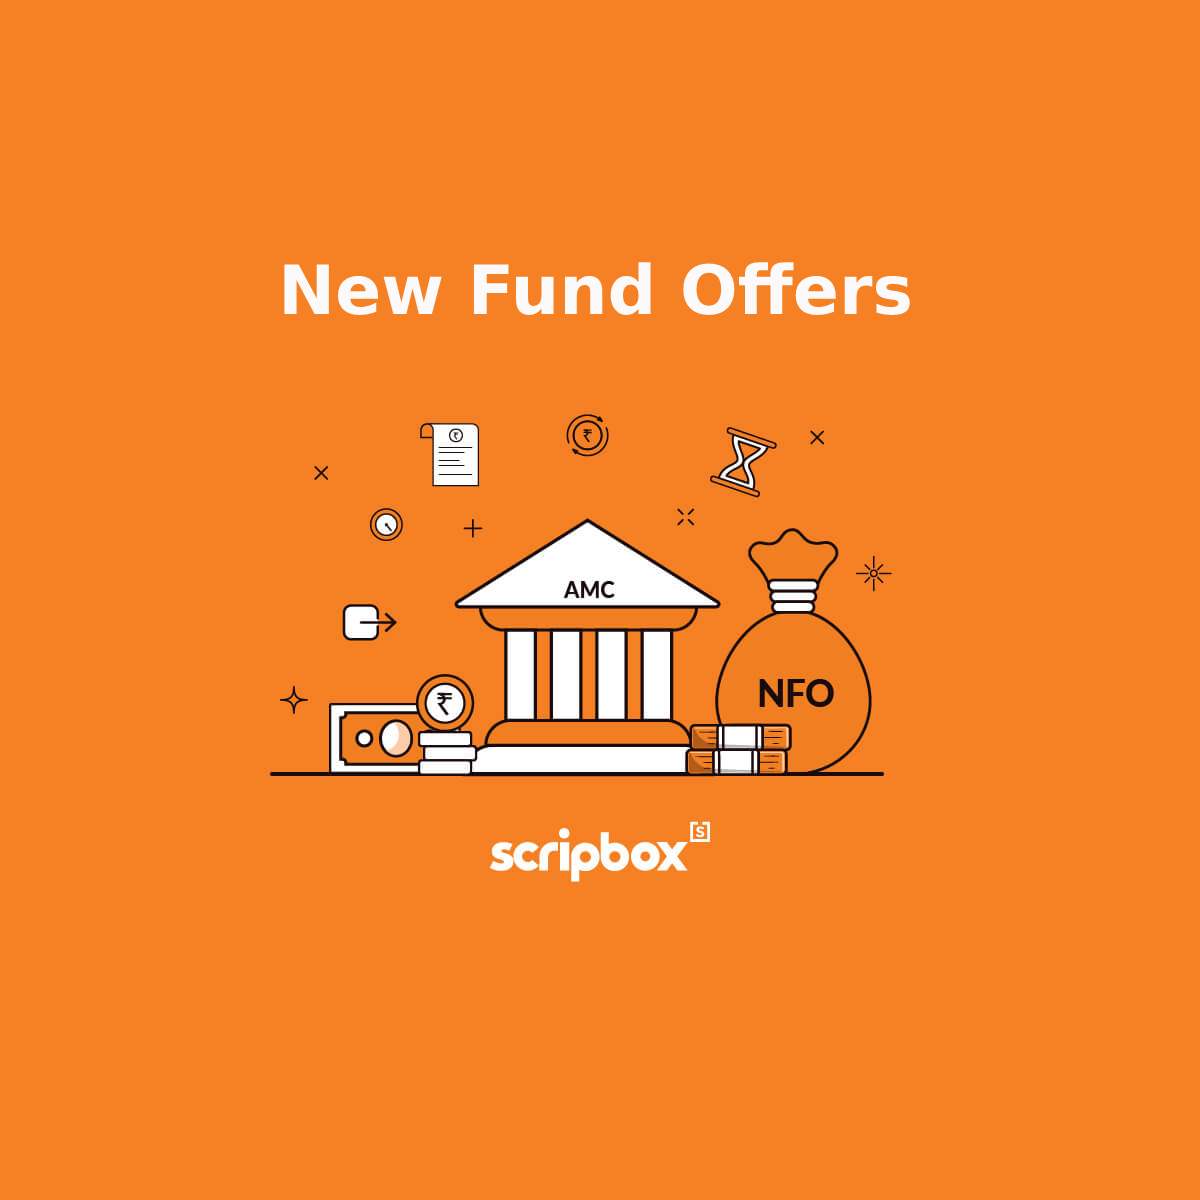 New Fund Offers Today